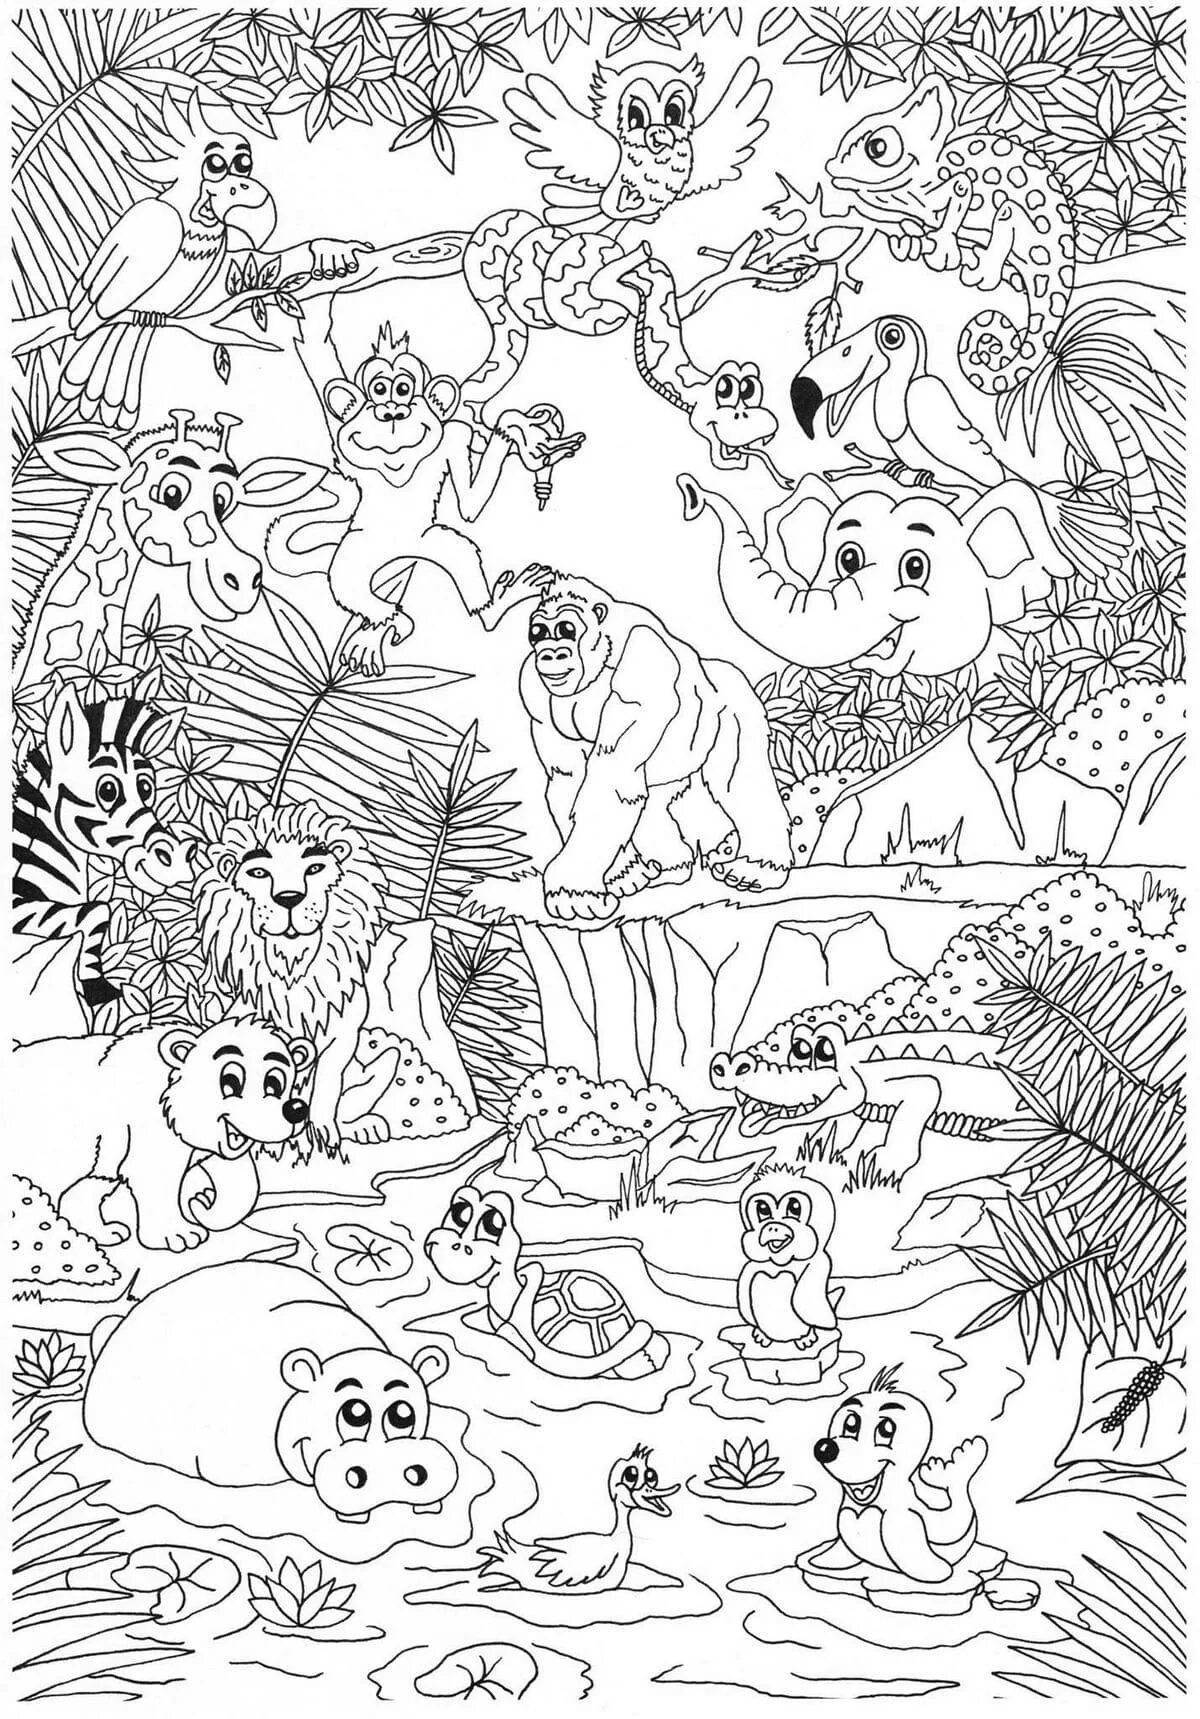 Find the animals fun coloring book